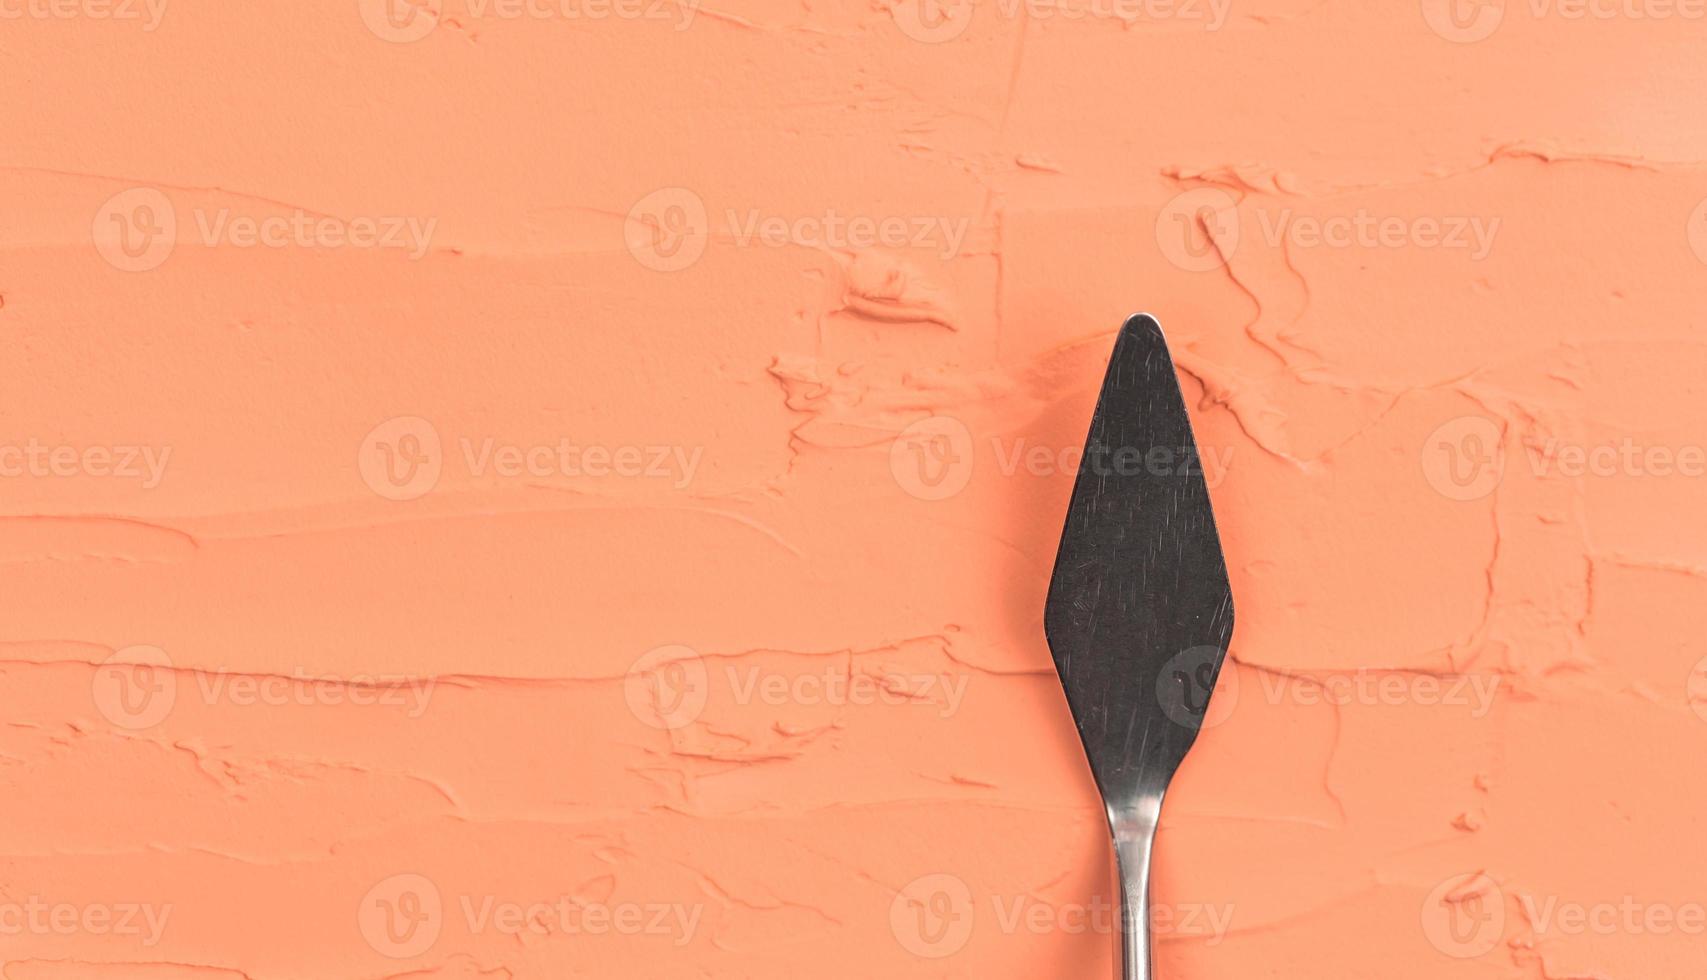 A painting palette knife isolated on a orange painted background painting with copy space photo